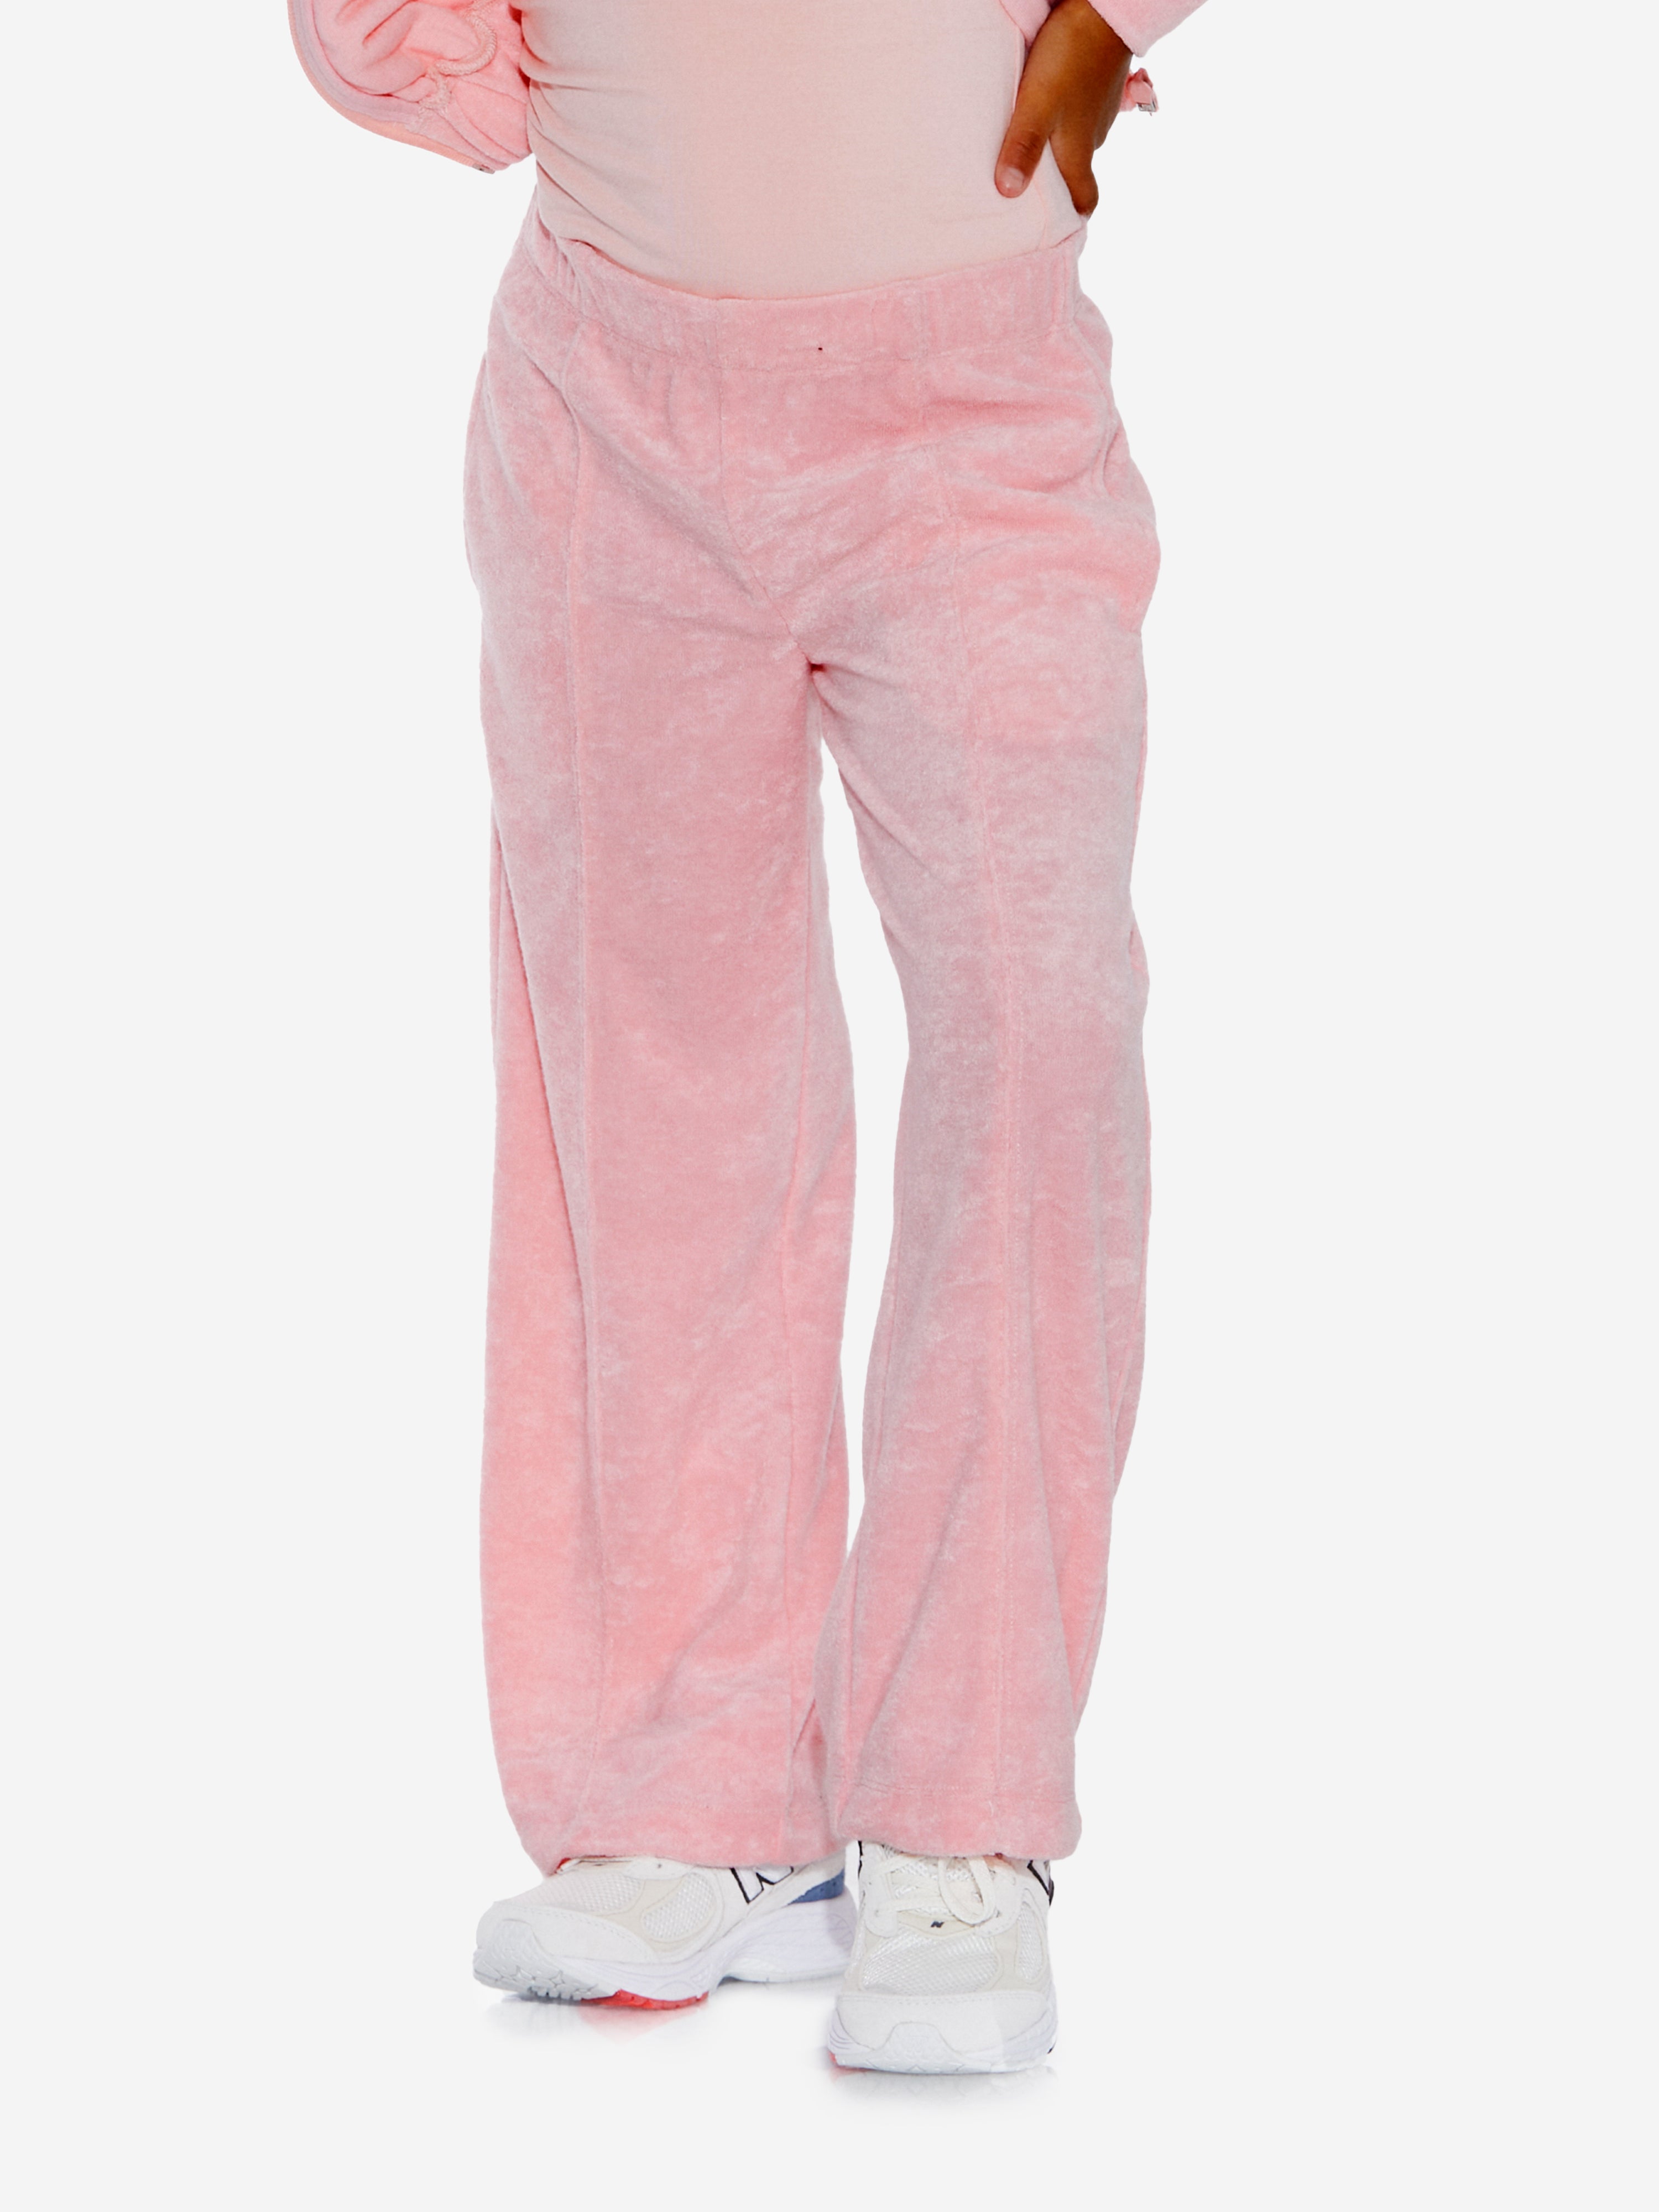 Ayla Sequin Trousers in Pink